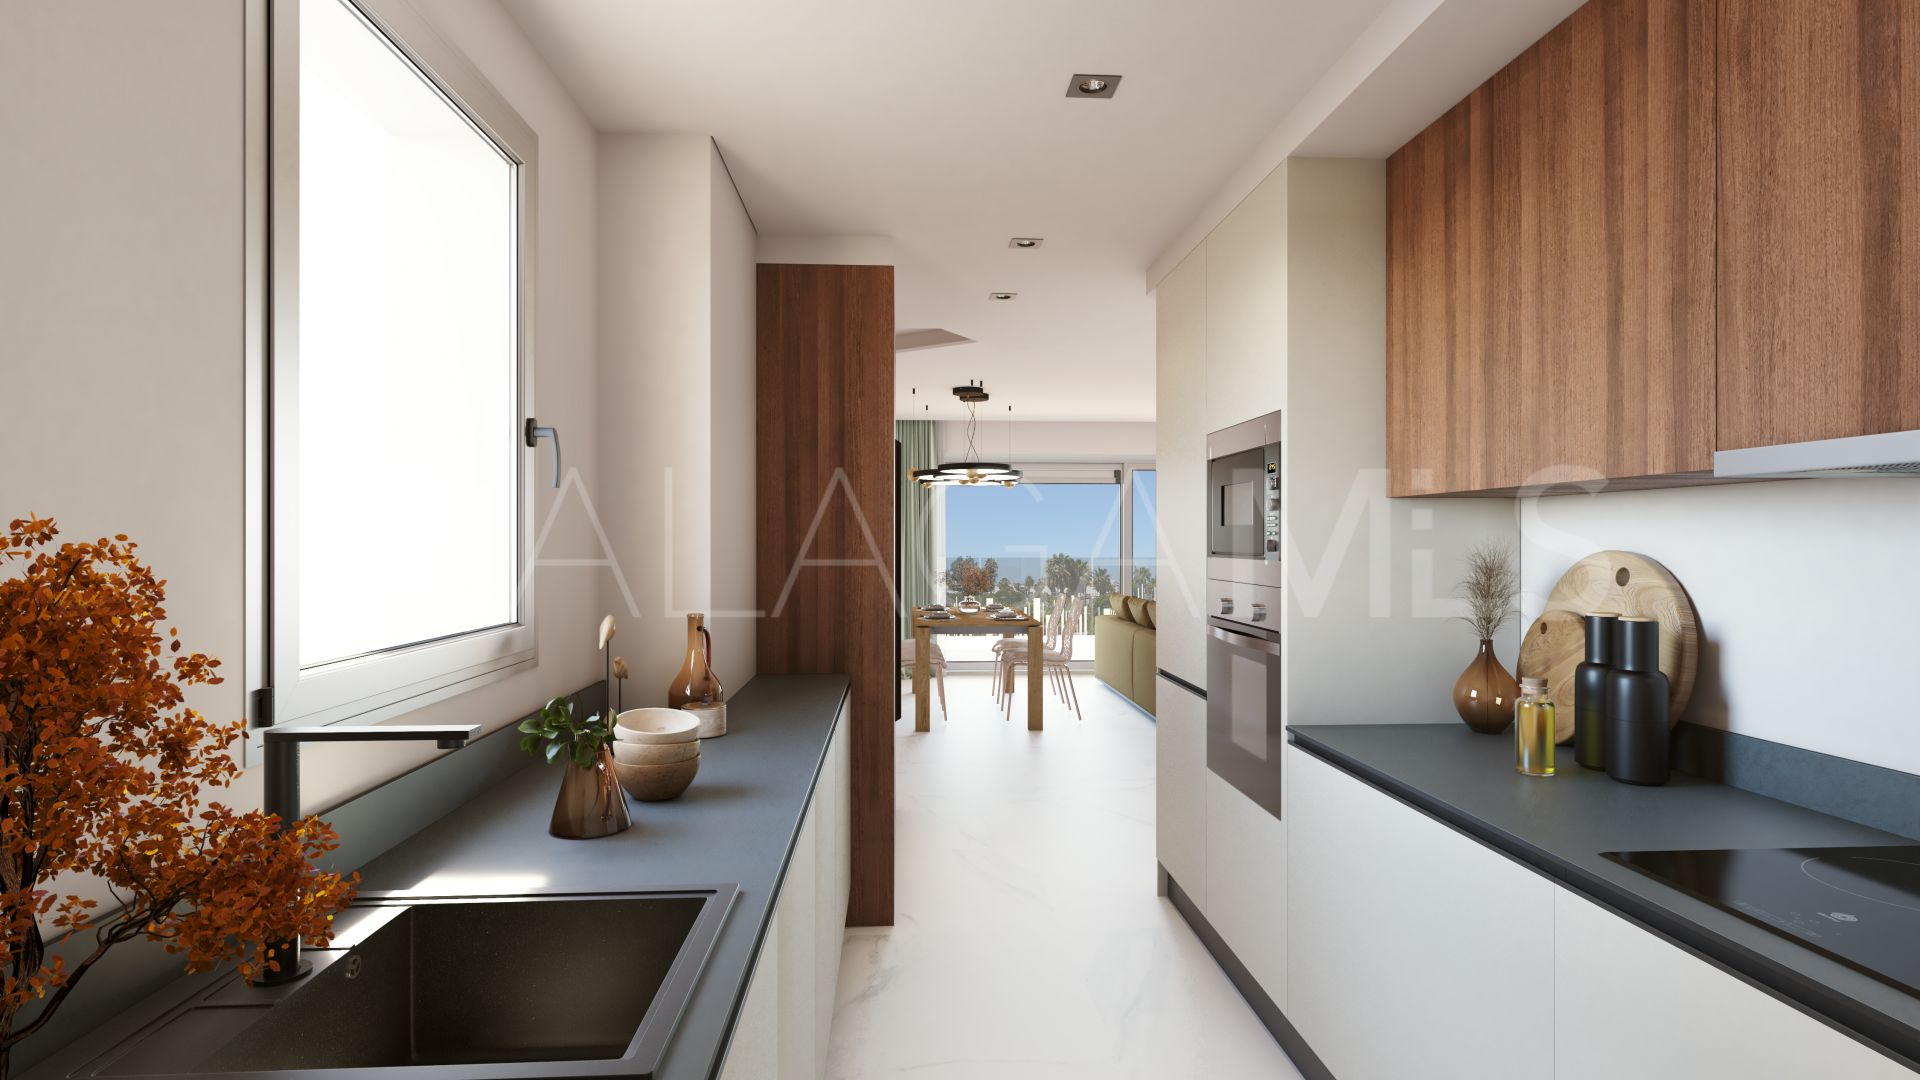 3 bedrooms apartment in San Pedro Playa for sale